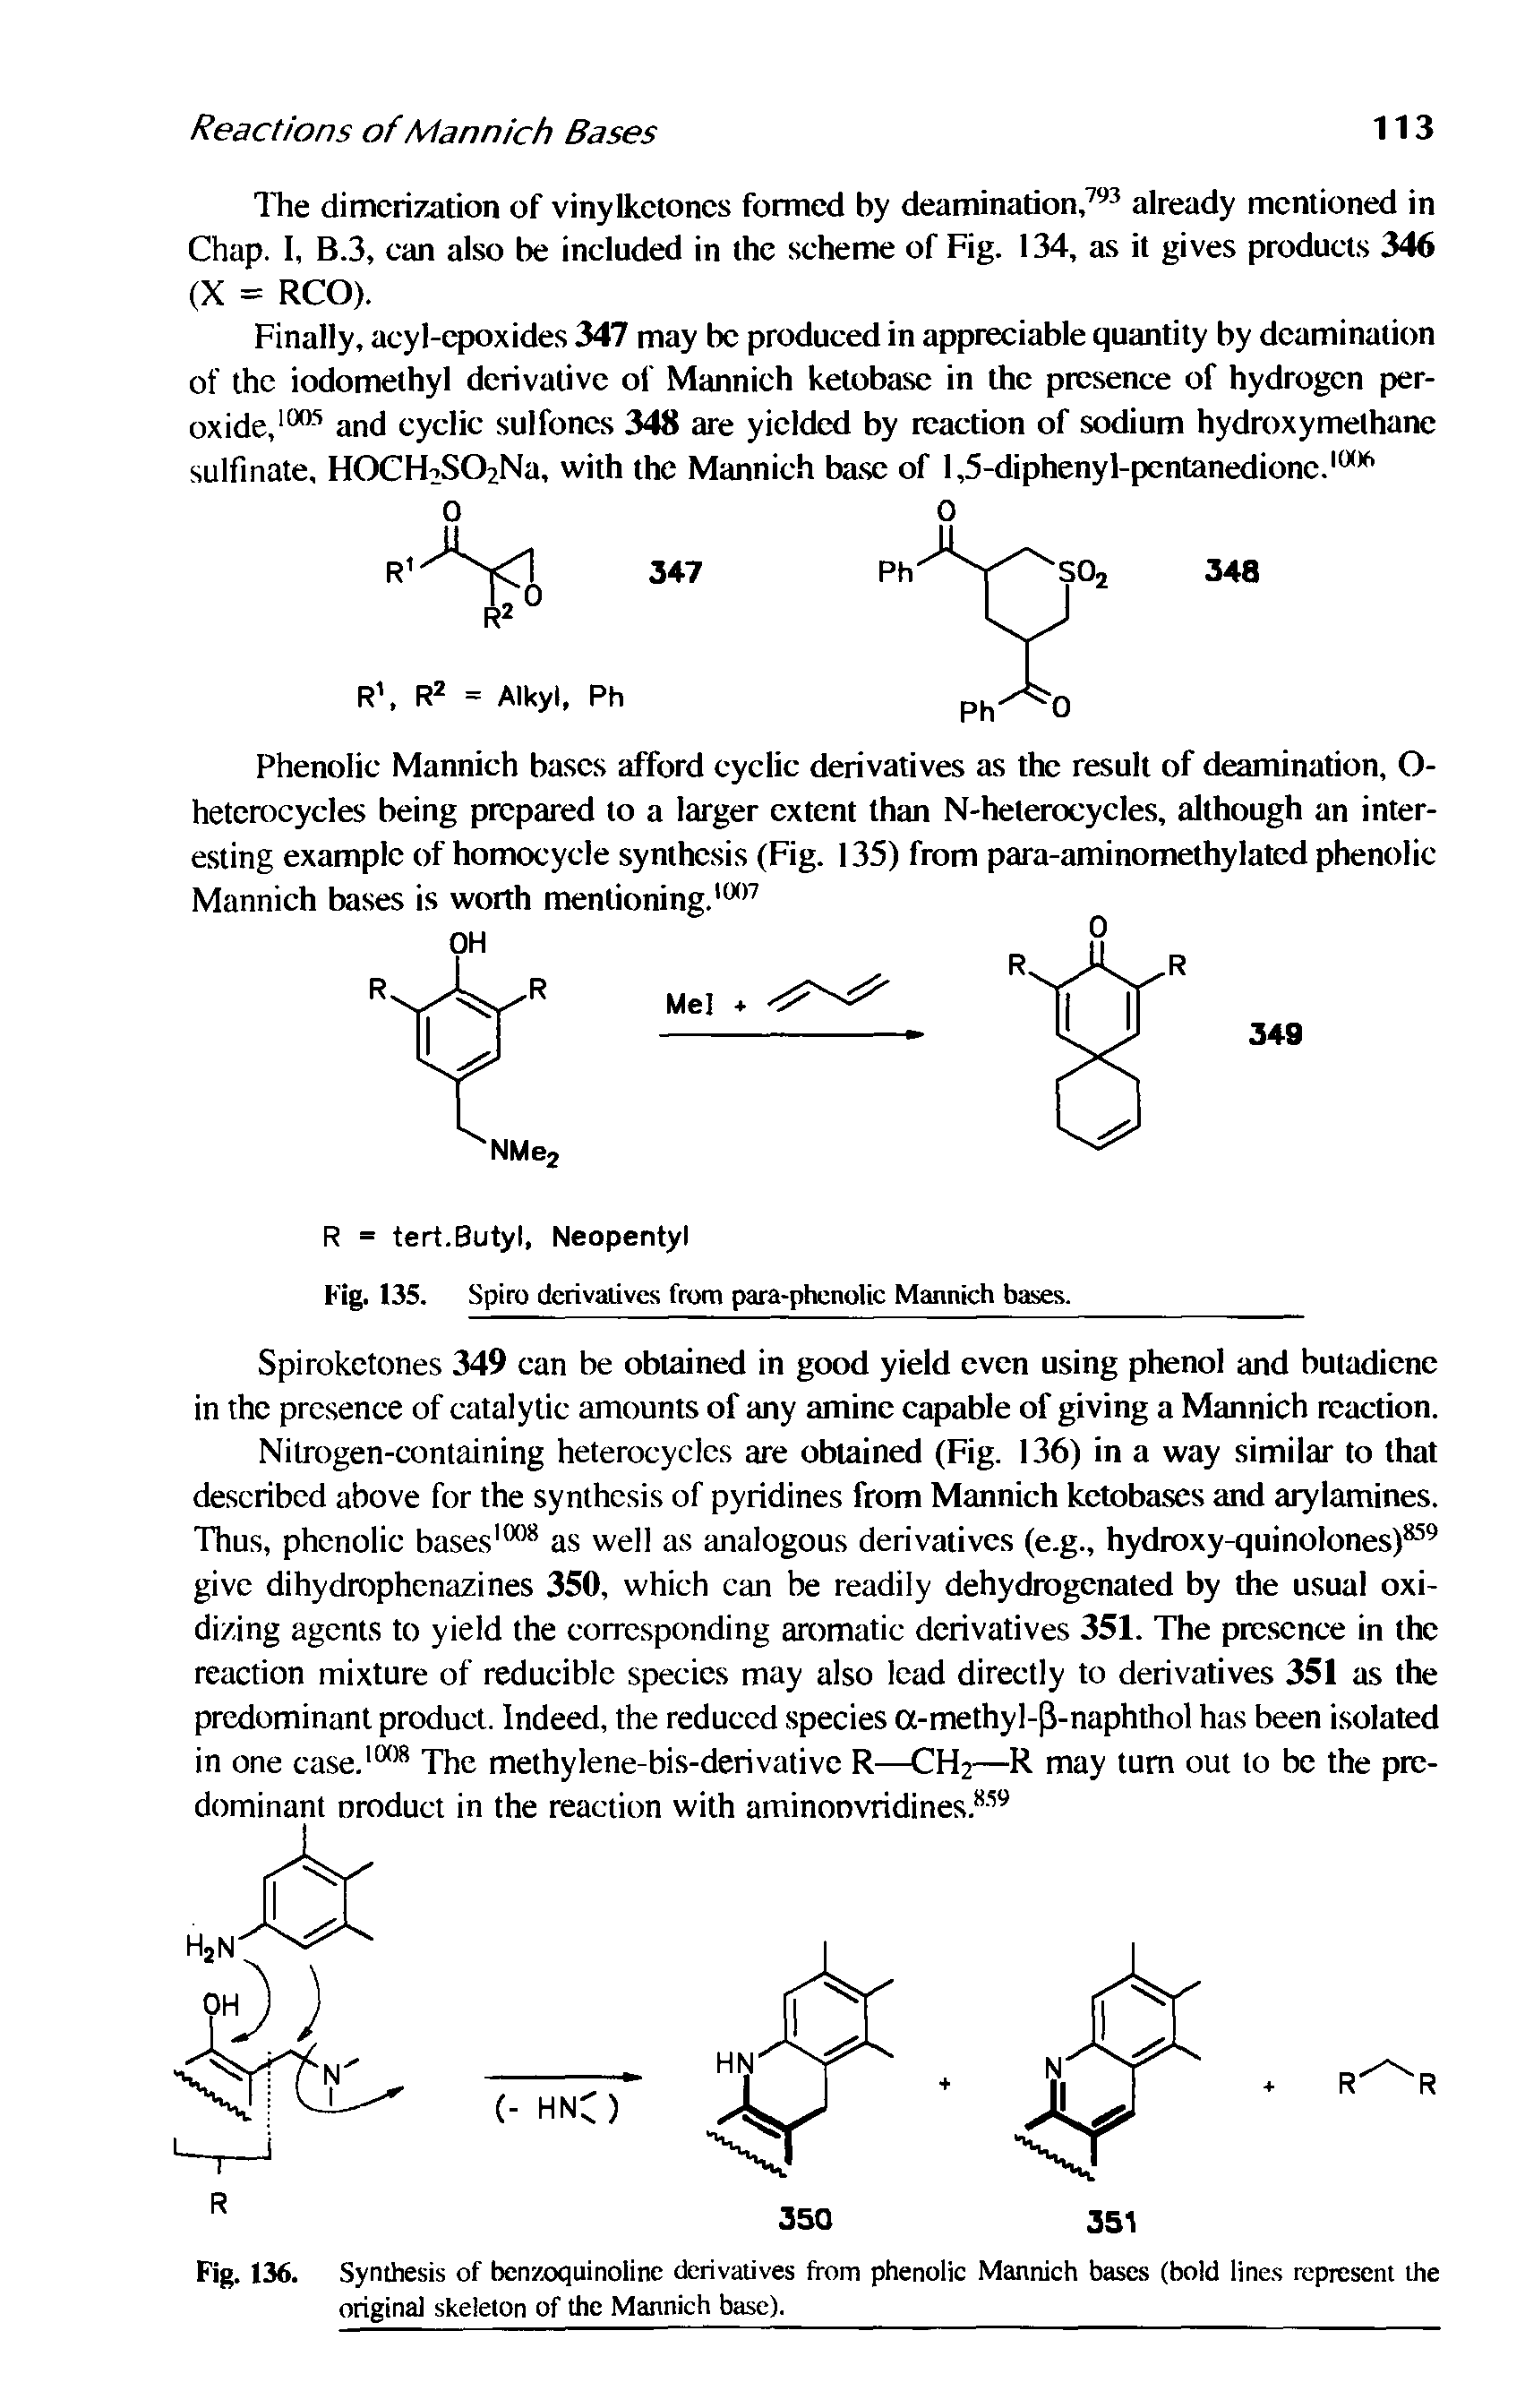 Fig. 136. Synthesis of bcnzxxjuinoiinc derivatives from phenolic Mannich bases (bold line.s represent the original skeleton of the Mannich base).